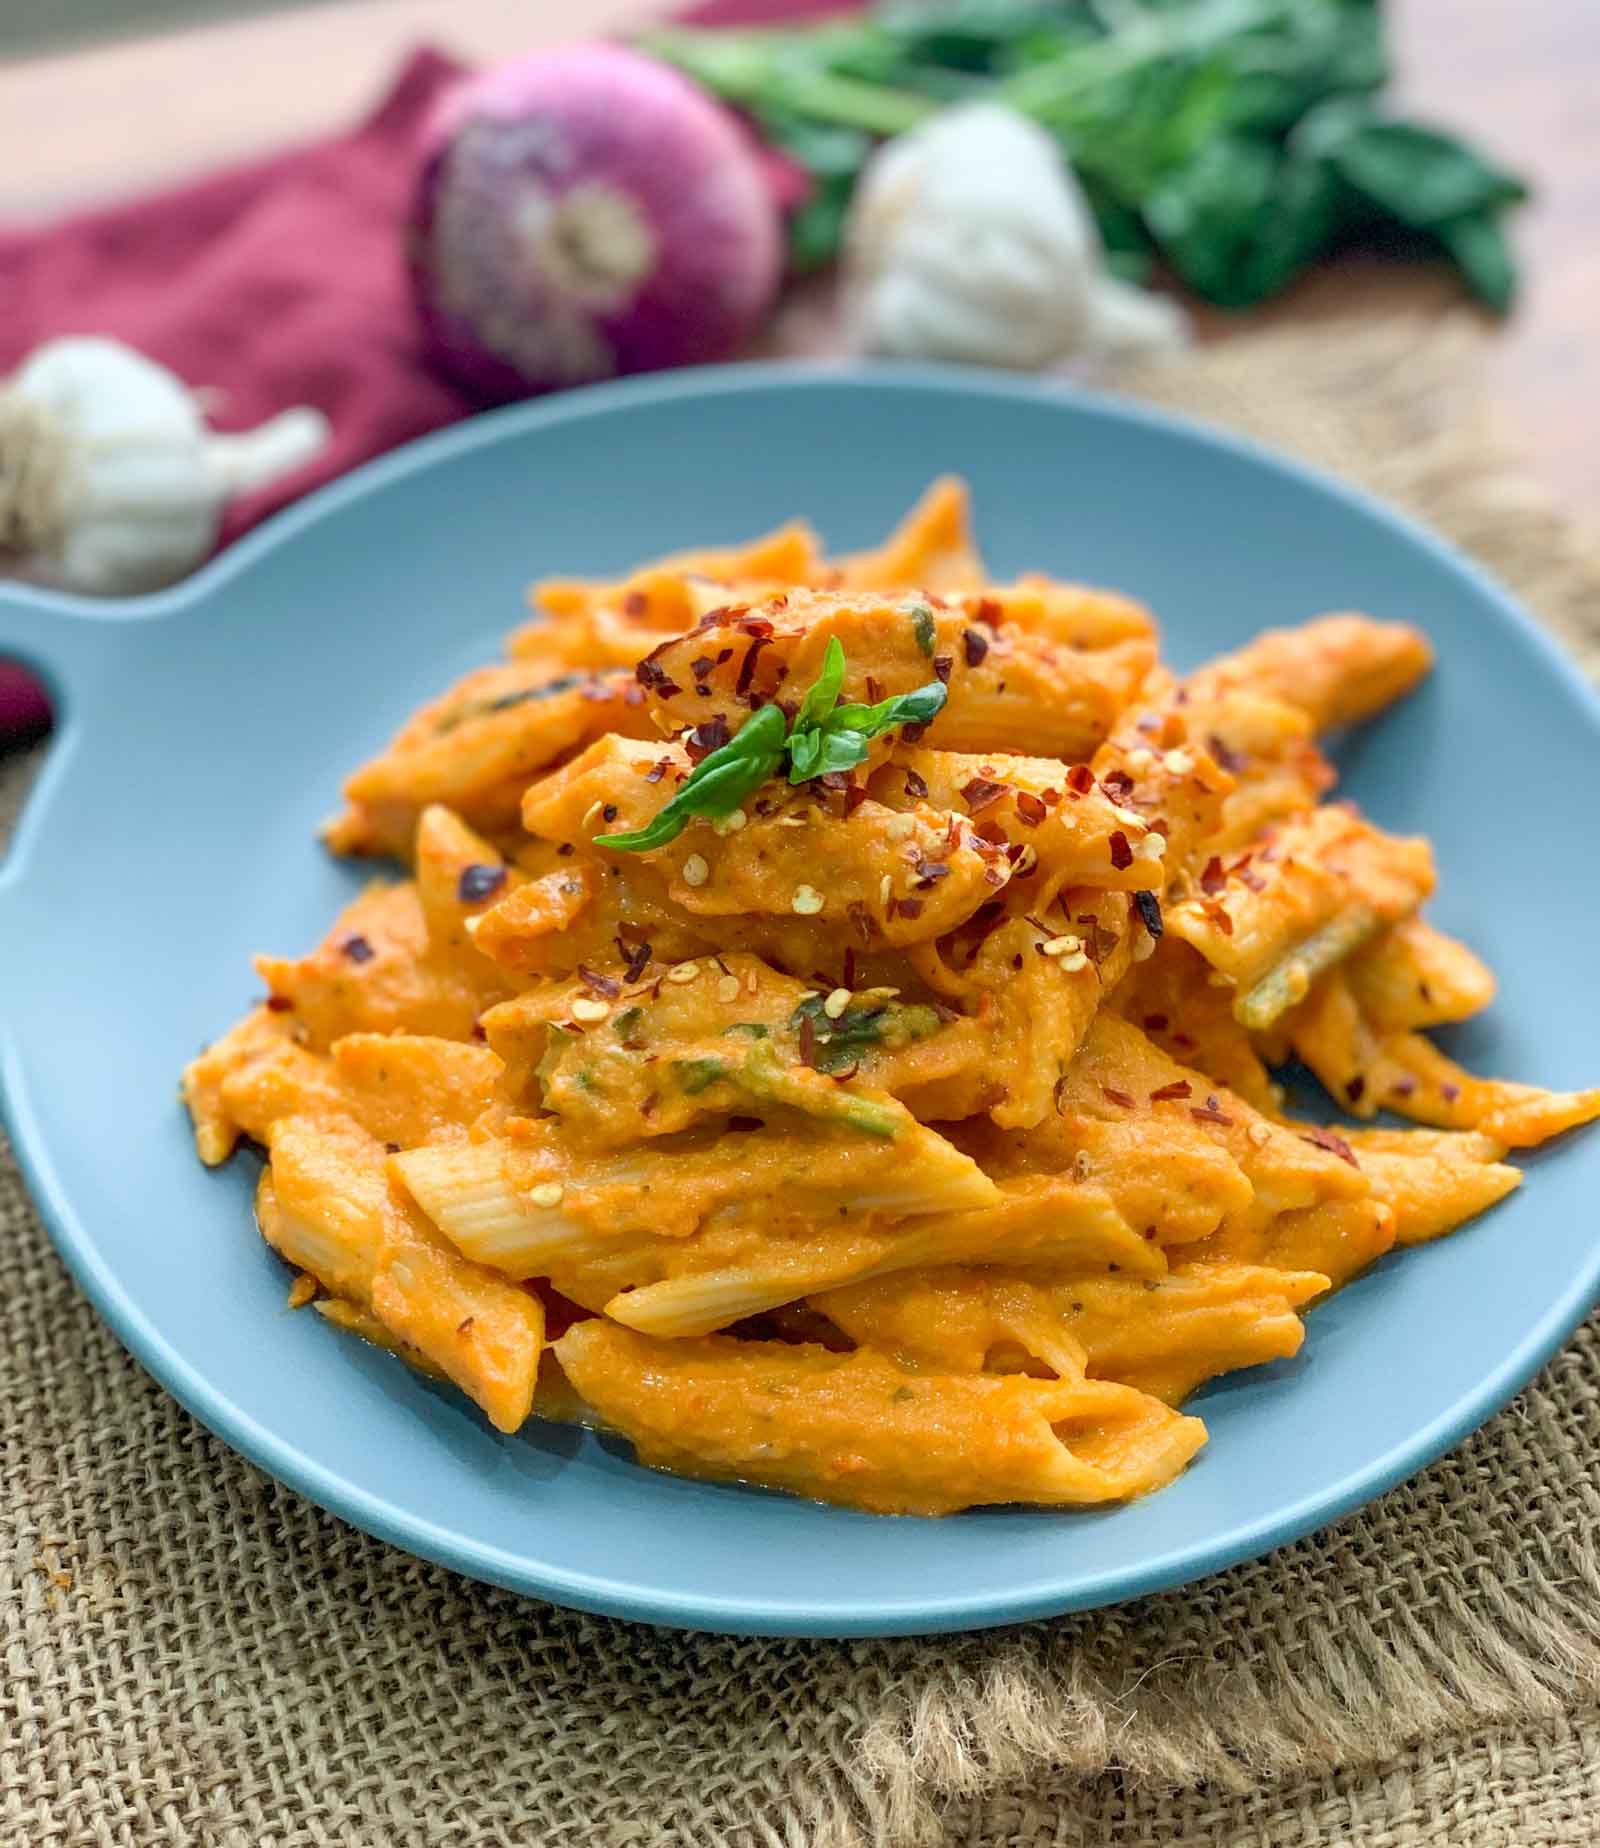 Pasta in Roasted Carrot & Red Pepper Sauce by Archana's Kitchen